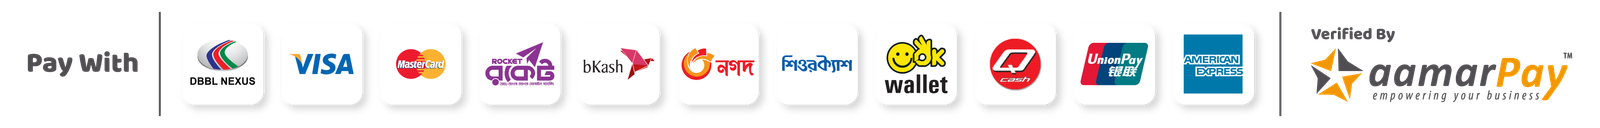 Rayat aamarpay payment banner